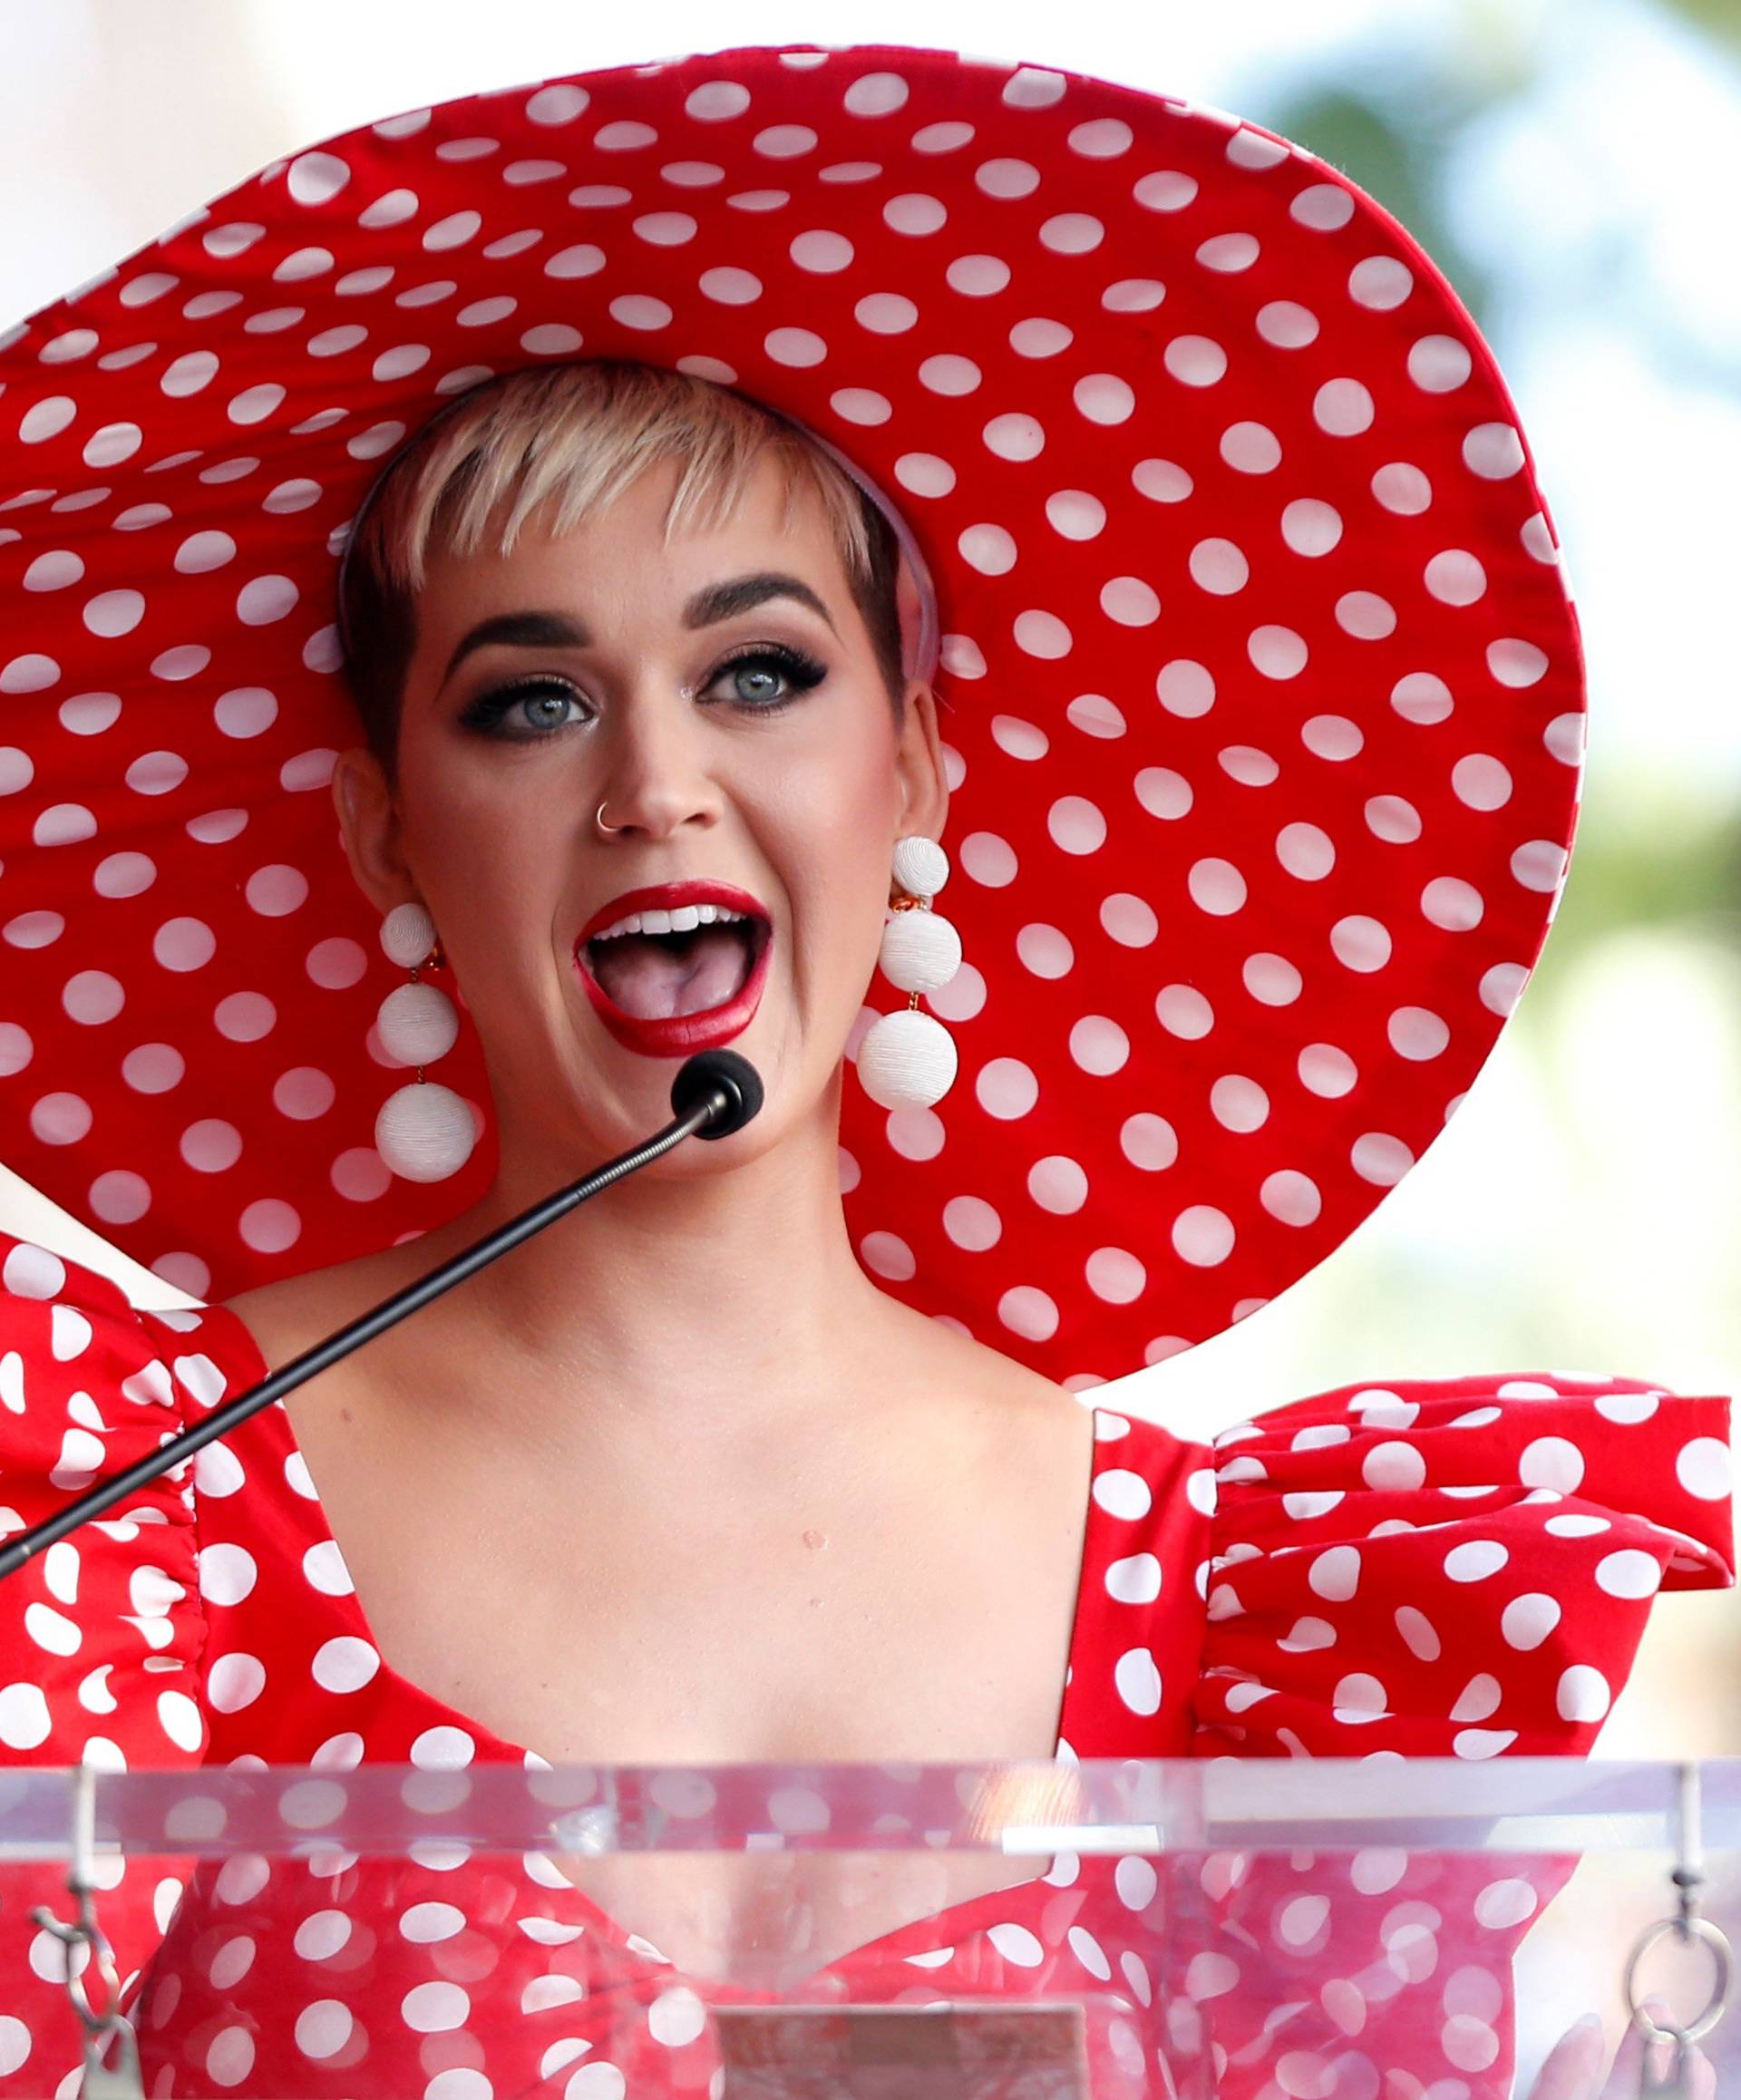 Singer Perry speaks at the unveiling of the star for Minnie Mouse on the Hollywood Walk of Fame in Los Angeles